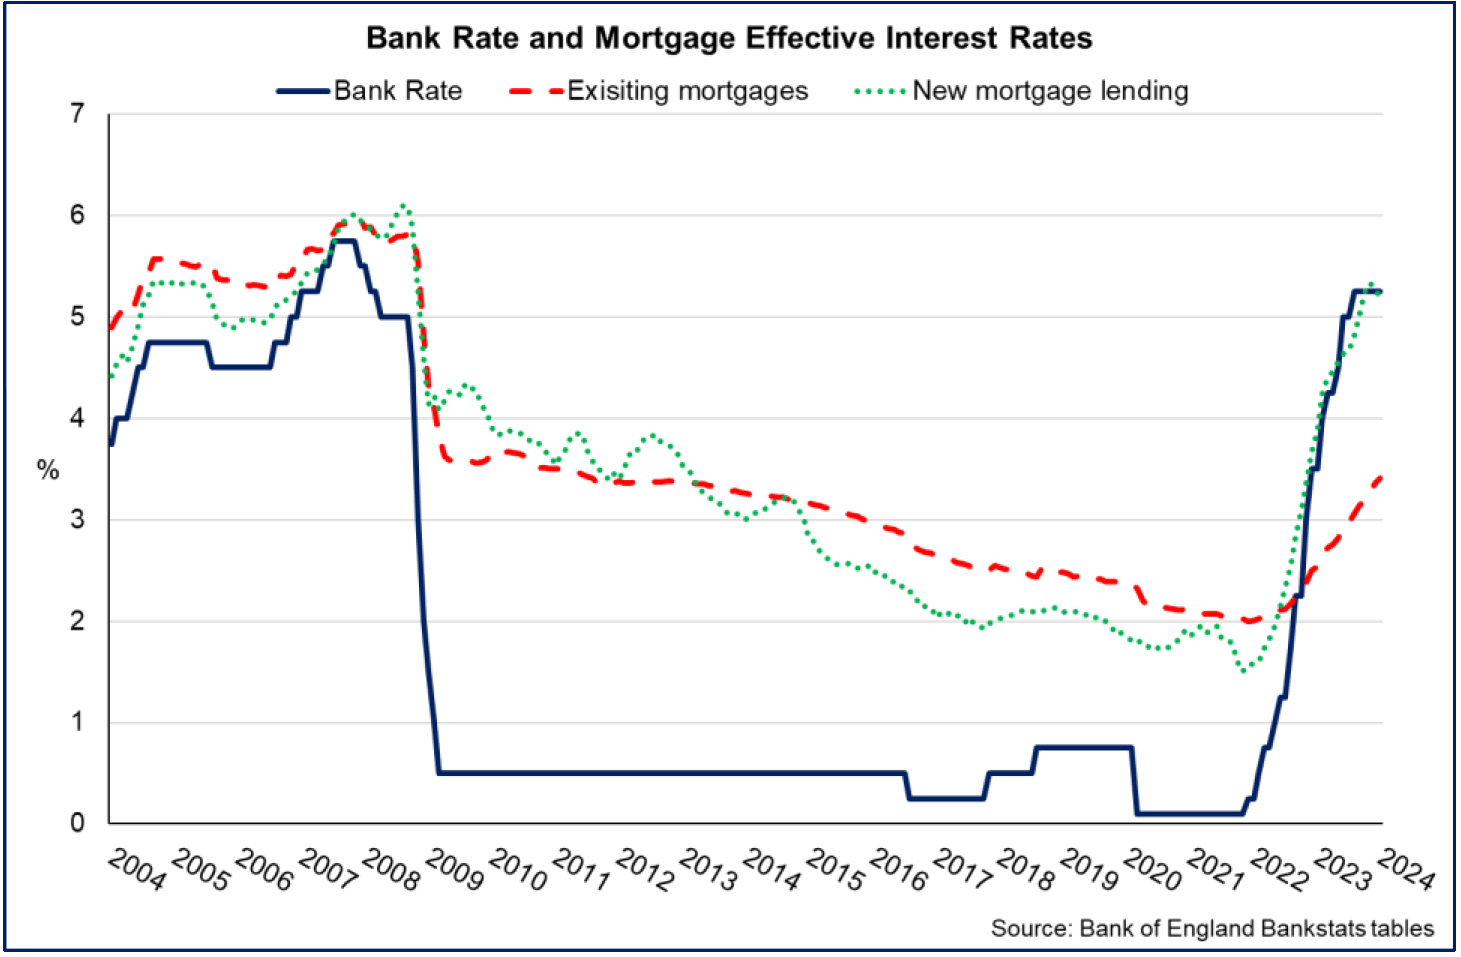 rise in the Bank Rate has fed through to the effective interest rate for new mortgage lending and has more gradually fed through to existing mortgage lending